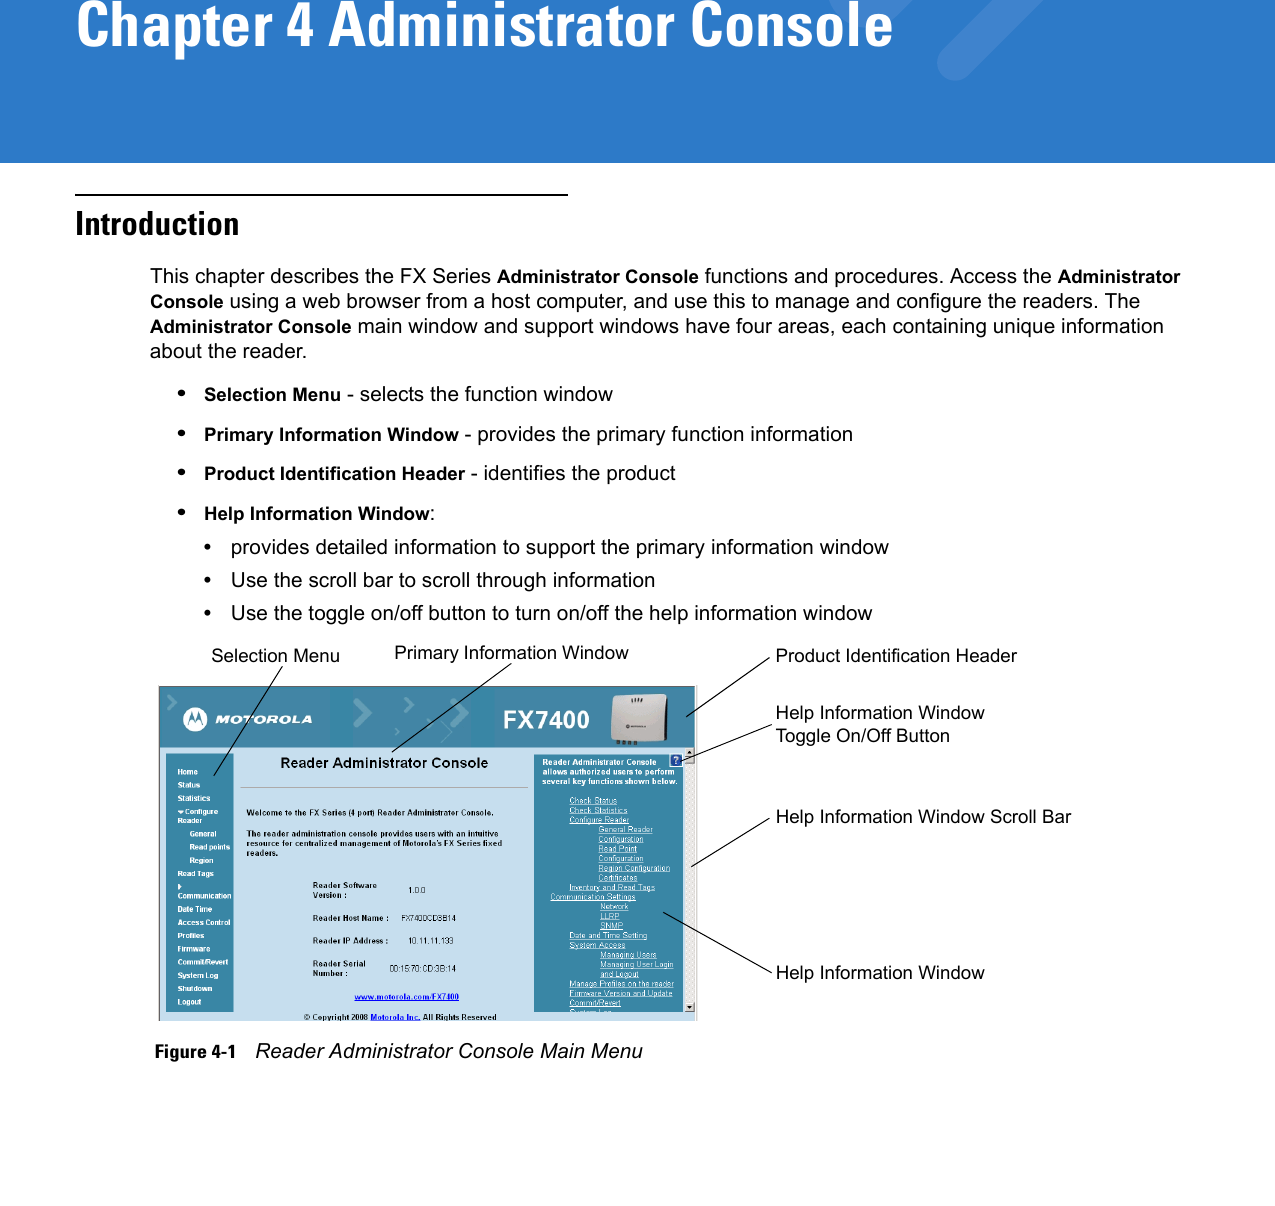 Chapter 4 Administrator ConsoleIntroductionThis chapter describes the FX Series Administrator Console functions and procedures. Access the Administrator Console using a web browser from a host computer, and use this to manage and configure the readers. The Administrator Console main window and support windows have four areas, each containing unique information about the reader.•Selection Menu - selects the function window •Primary Information Window - provides the primary function information•Product Identification Header - identifies the product•Help Information Window:•provides detailed information to support the primary information window•Use the scroll bar to scroll through information•Use the toggle on/off button to turn on/off the help information window Figure 4-1    Reader Administrator Console Main MenuSelection Menu Primary Information Window Product Identification HeaderHelp Information Window Toggle On/Off ButtonHelp Information Window Scroll BarHelp Information Window